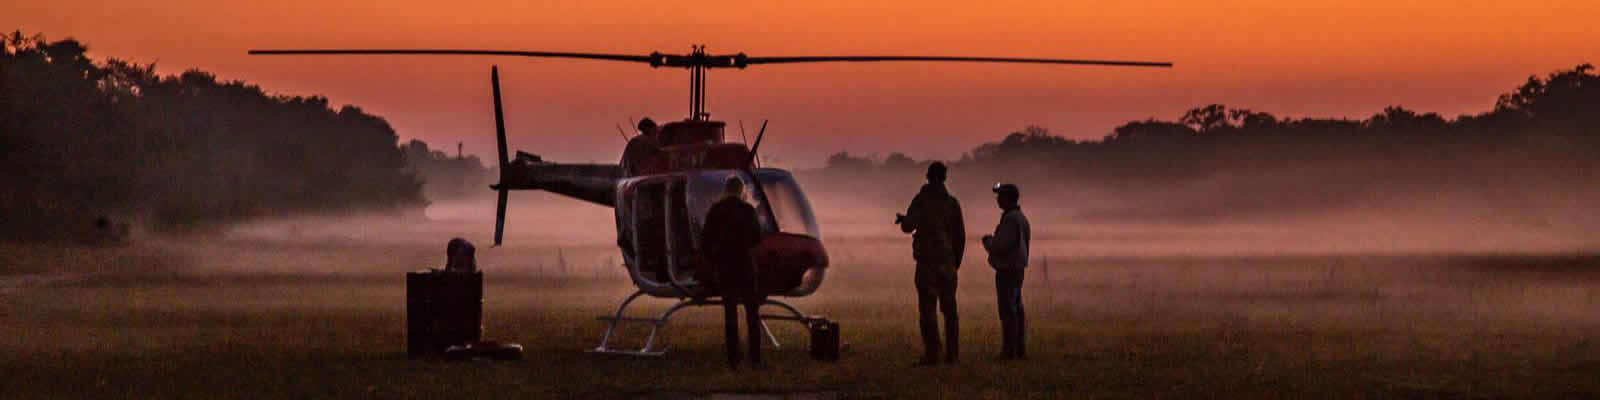 Contact details Sunrise Aviation Helicopter charters